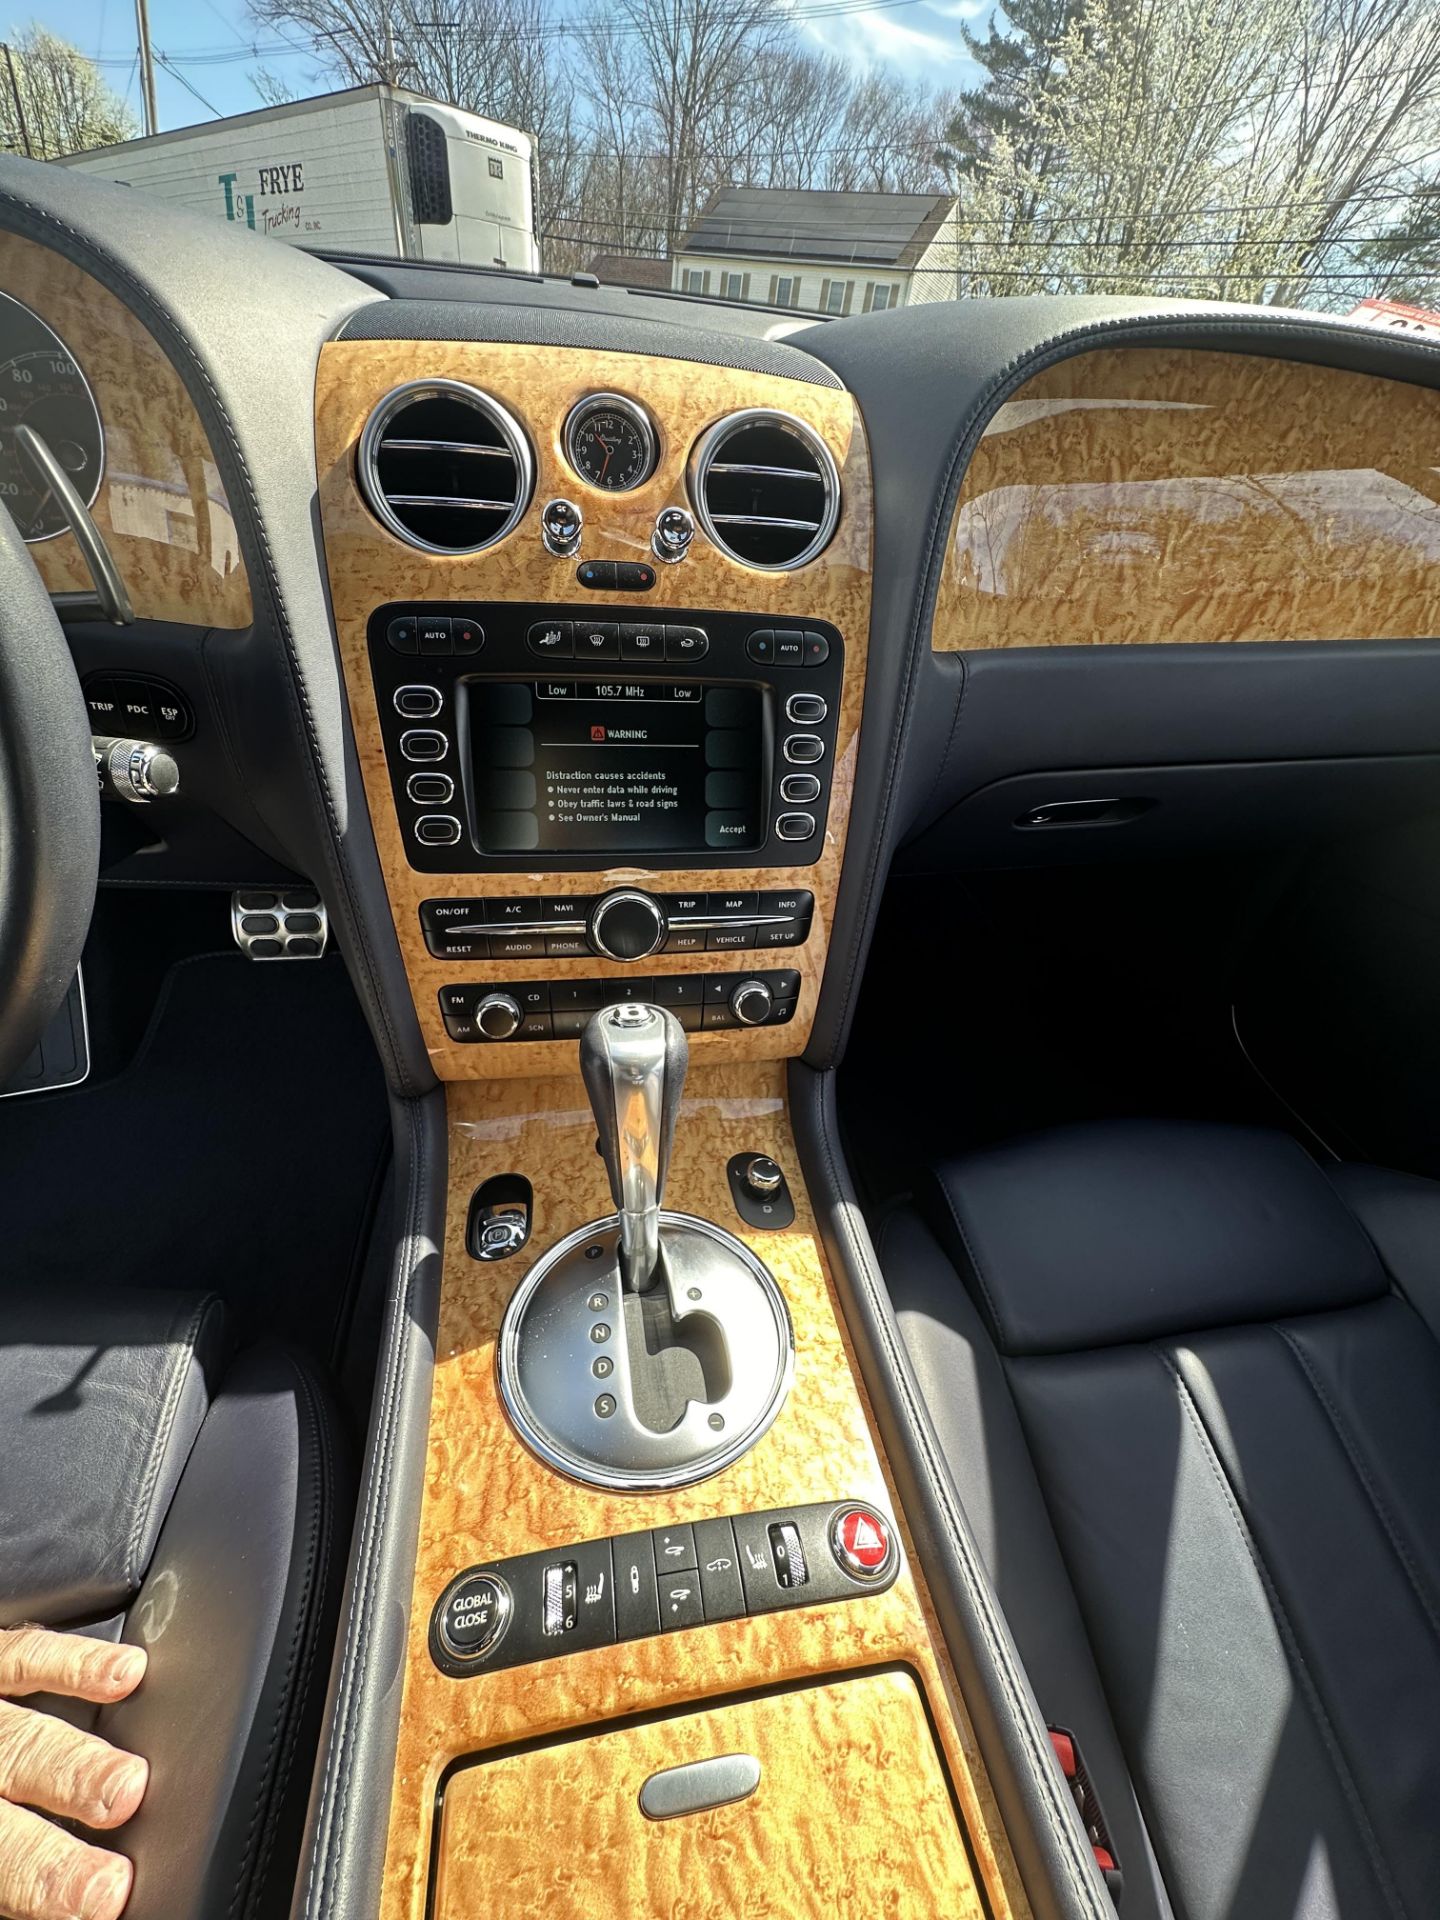 2005 Bentley Continental GT Coupe, Odom: 14,600, VIN#: SCBCR63W35C029782 - Image 20 of 24